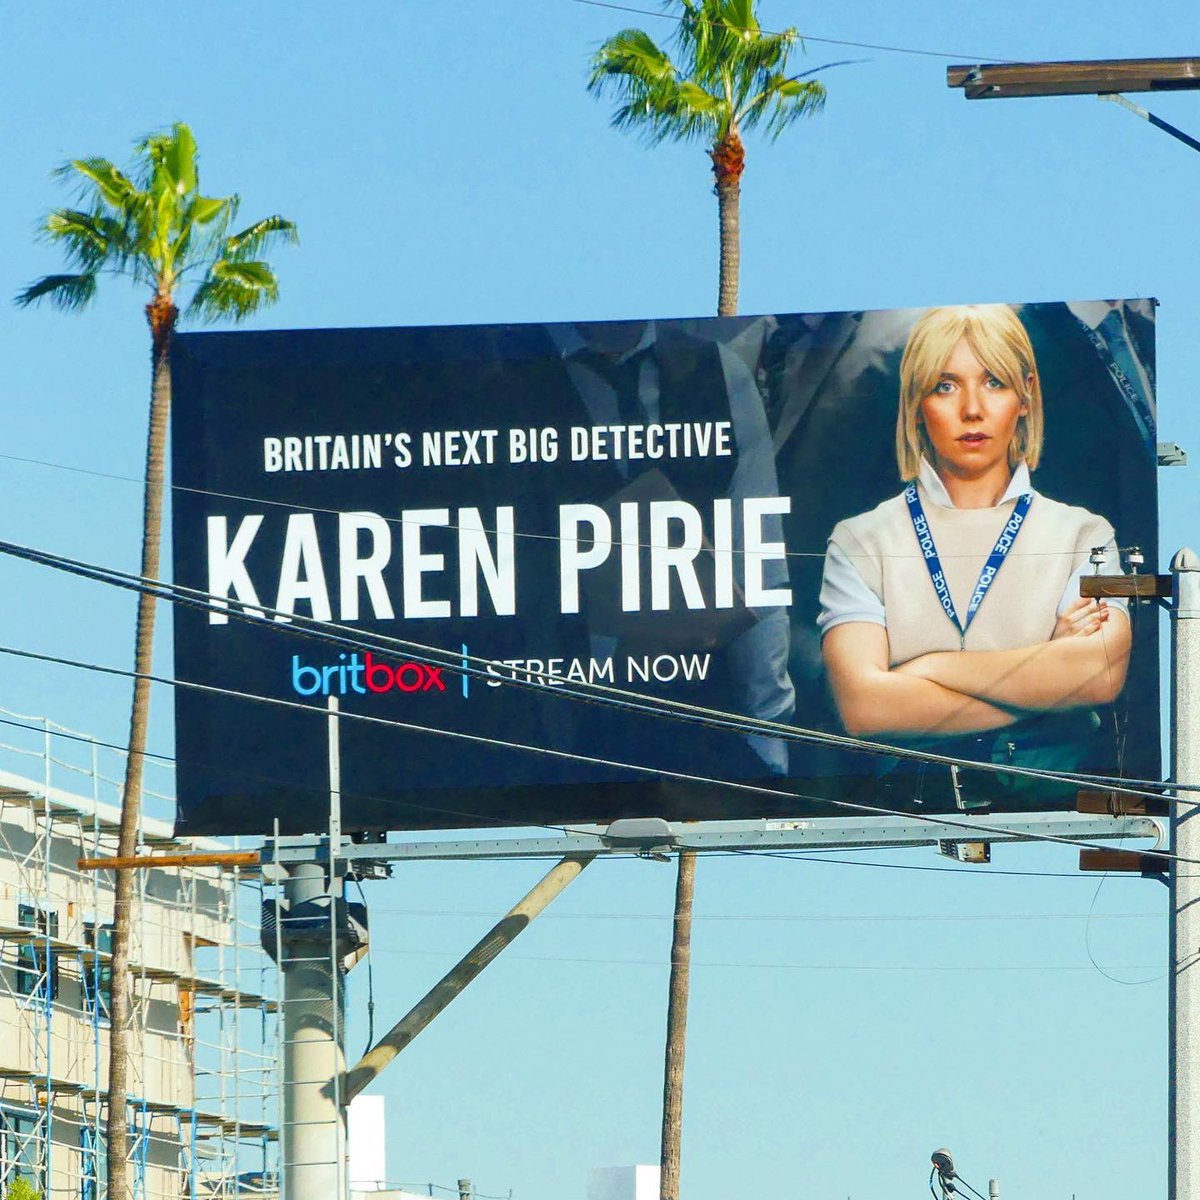 East coast to the west… Tash & Albert up in Times Square, Karen goes to Hollywood… WE OUT HERE BABY!!! Both available to watch in 🇺🇸 on @BritBox_US. #TheCurse #KarenPirie